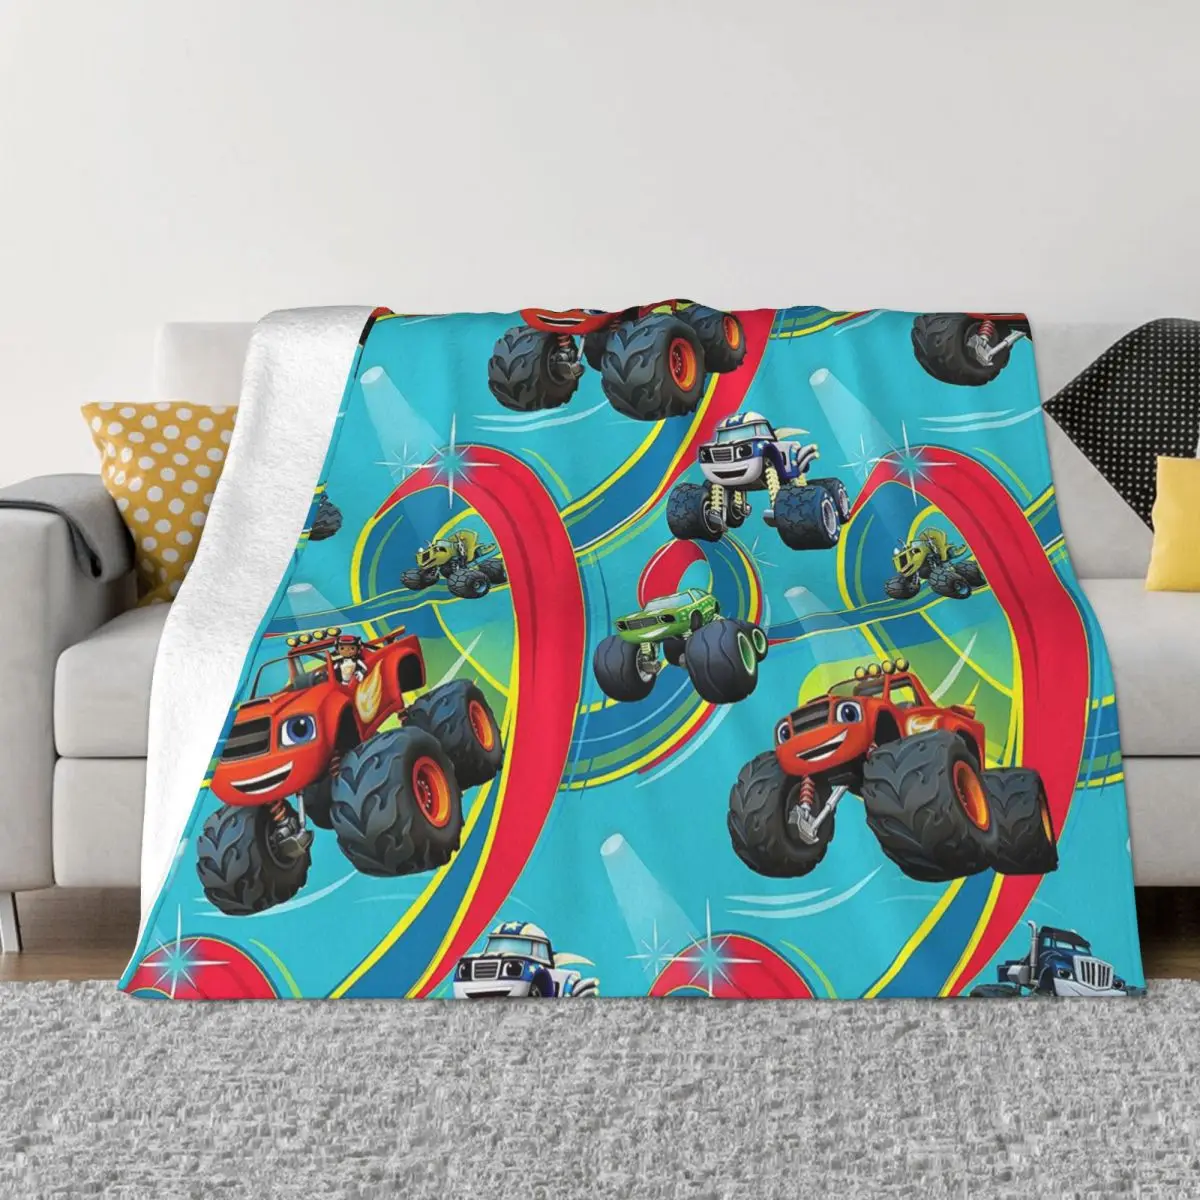 

Blaze And The Monster Machines Blanket Coral Fleece Plush Racing Cartoon Warm Throw Blankets for Home Couch Bedspread